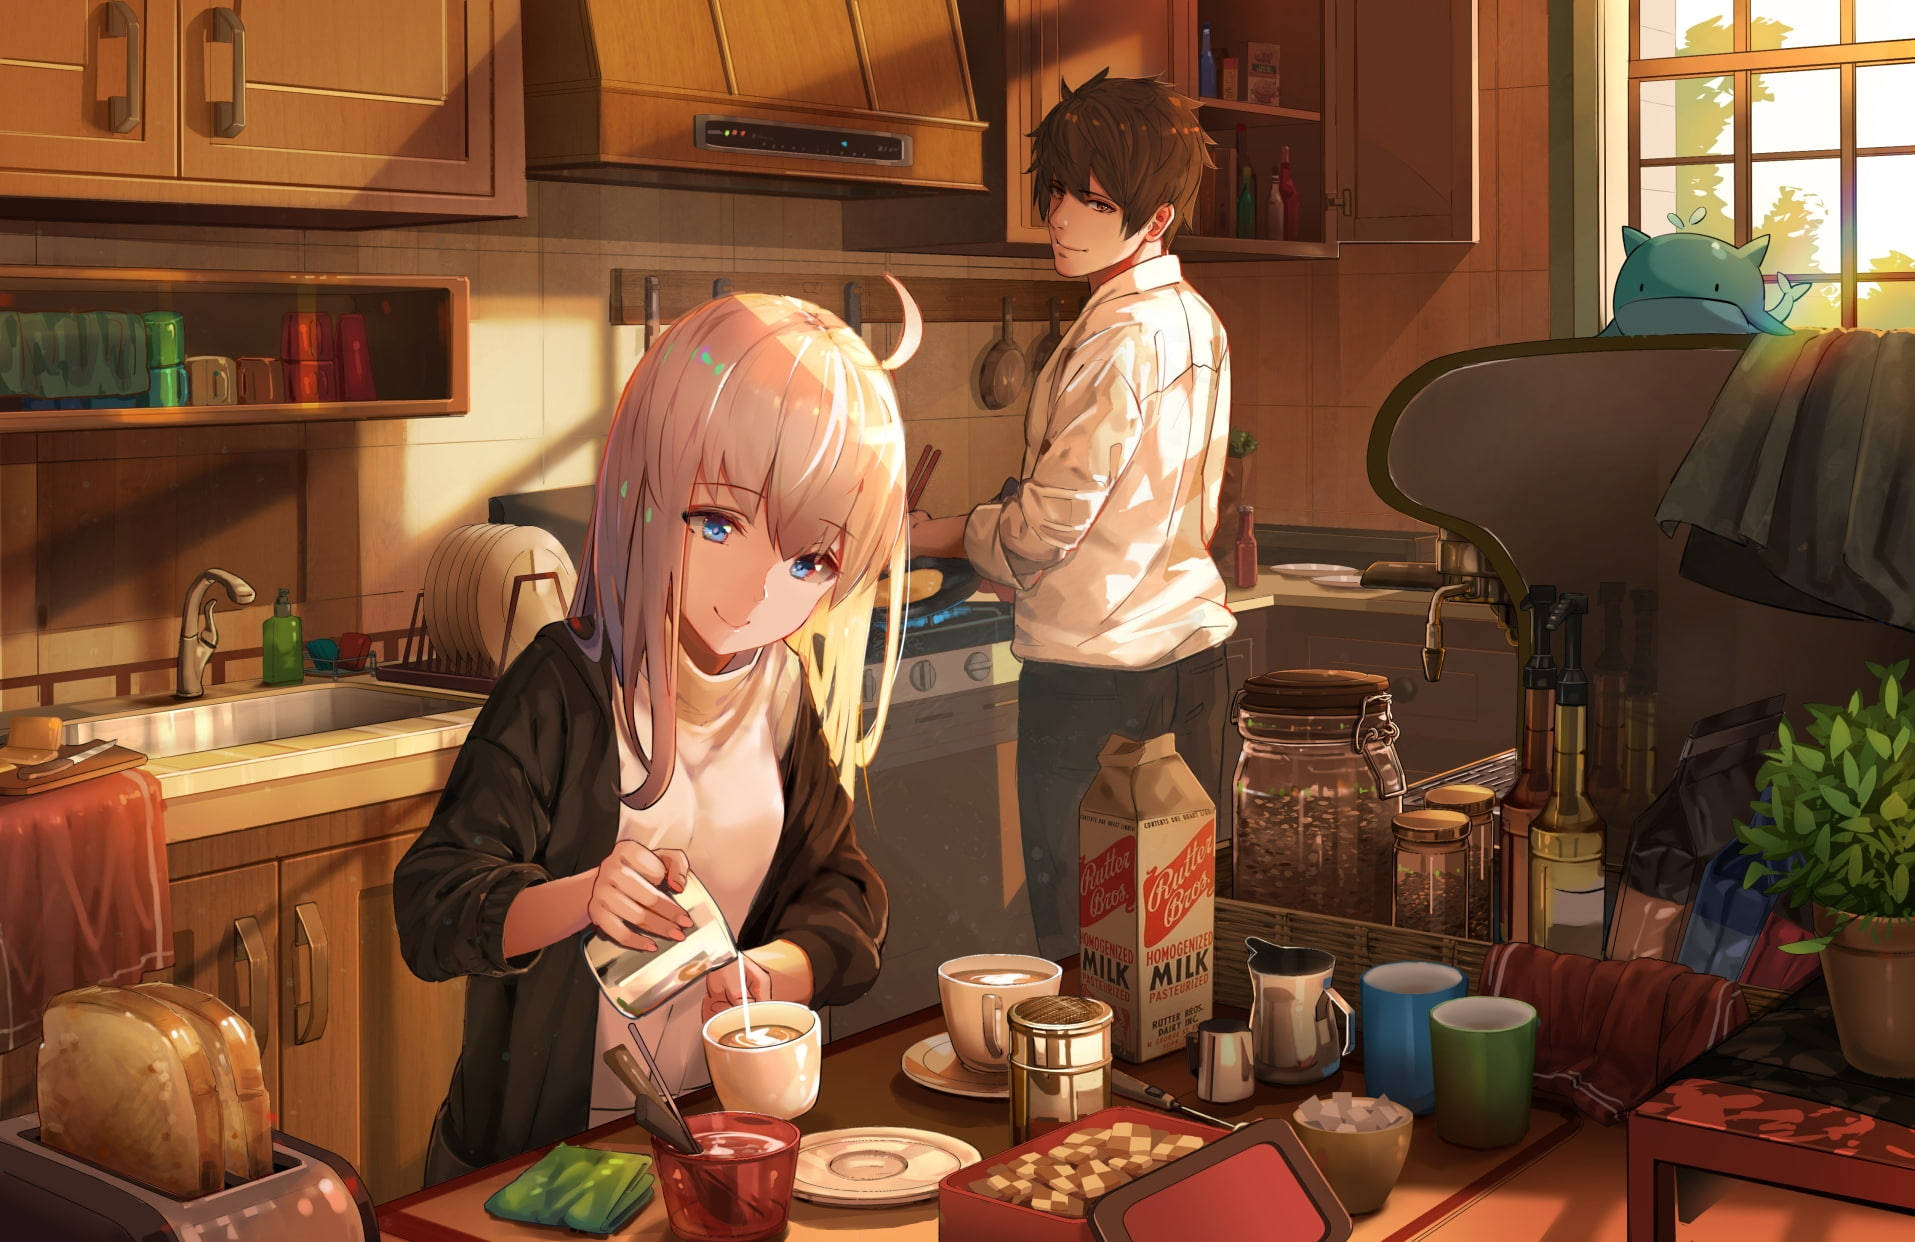 Cute Anime Couple Kitchen Background